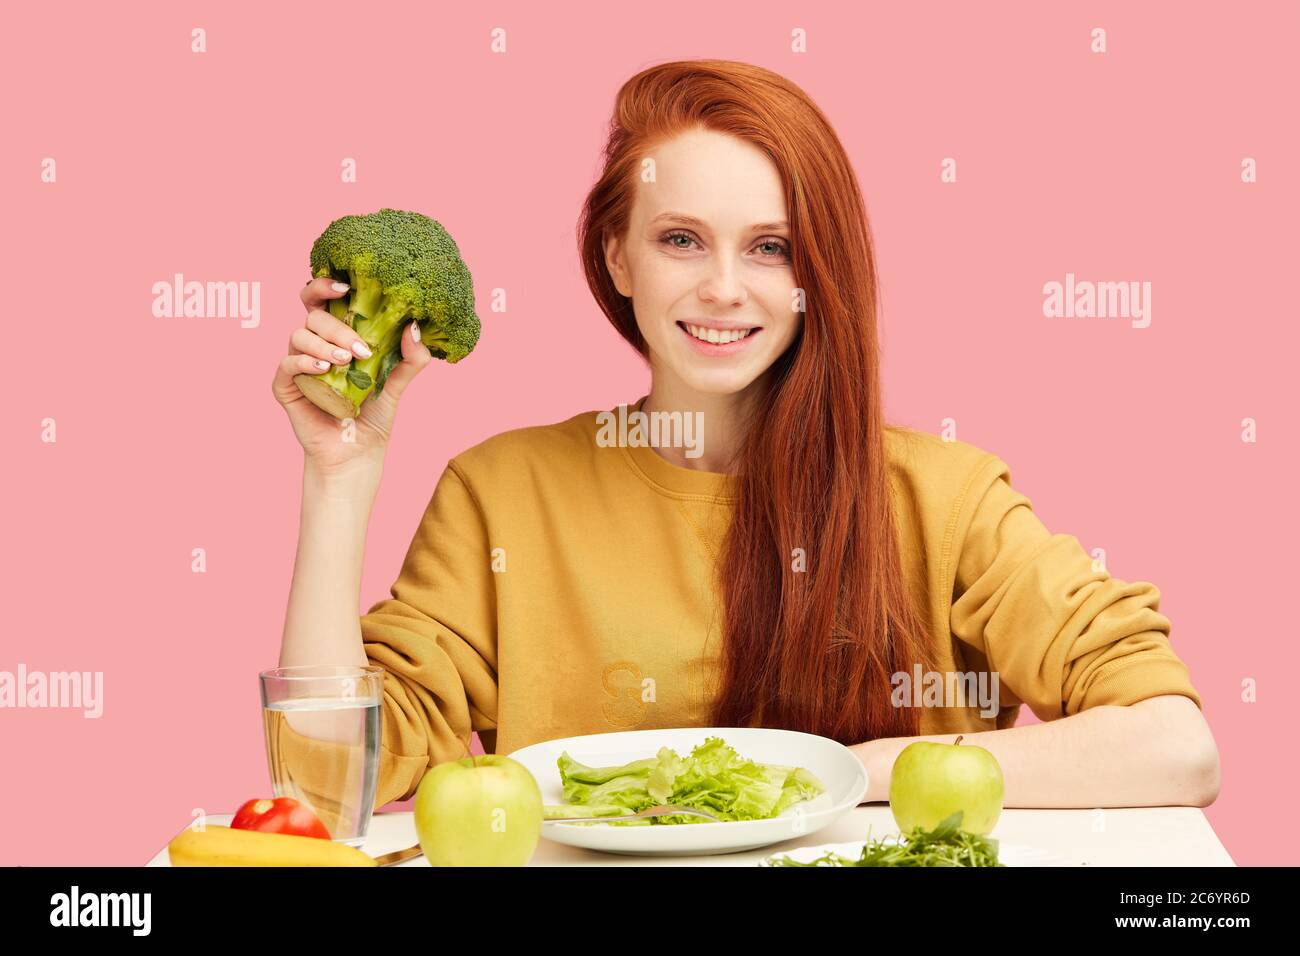 young pleasantly-looking vegg woman eating with eagerness and appetite raw green broccoli , smiling happy at camera over studio isolated pink backgrou Stock Photo